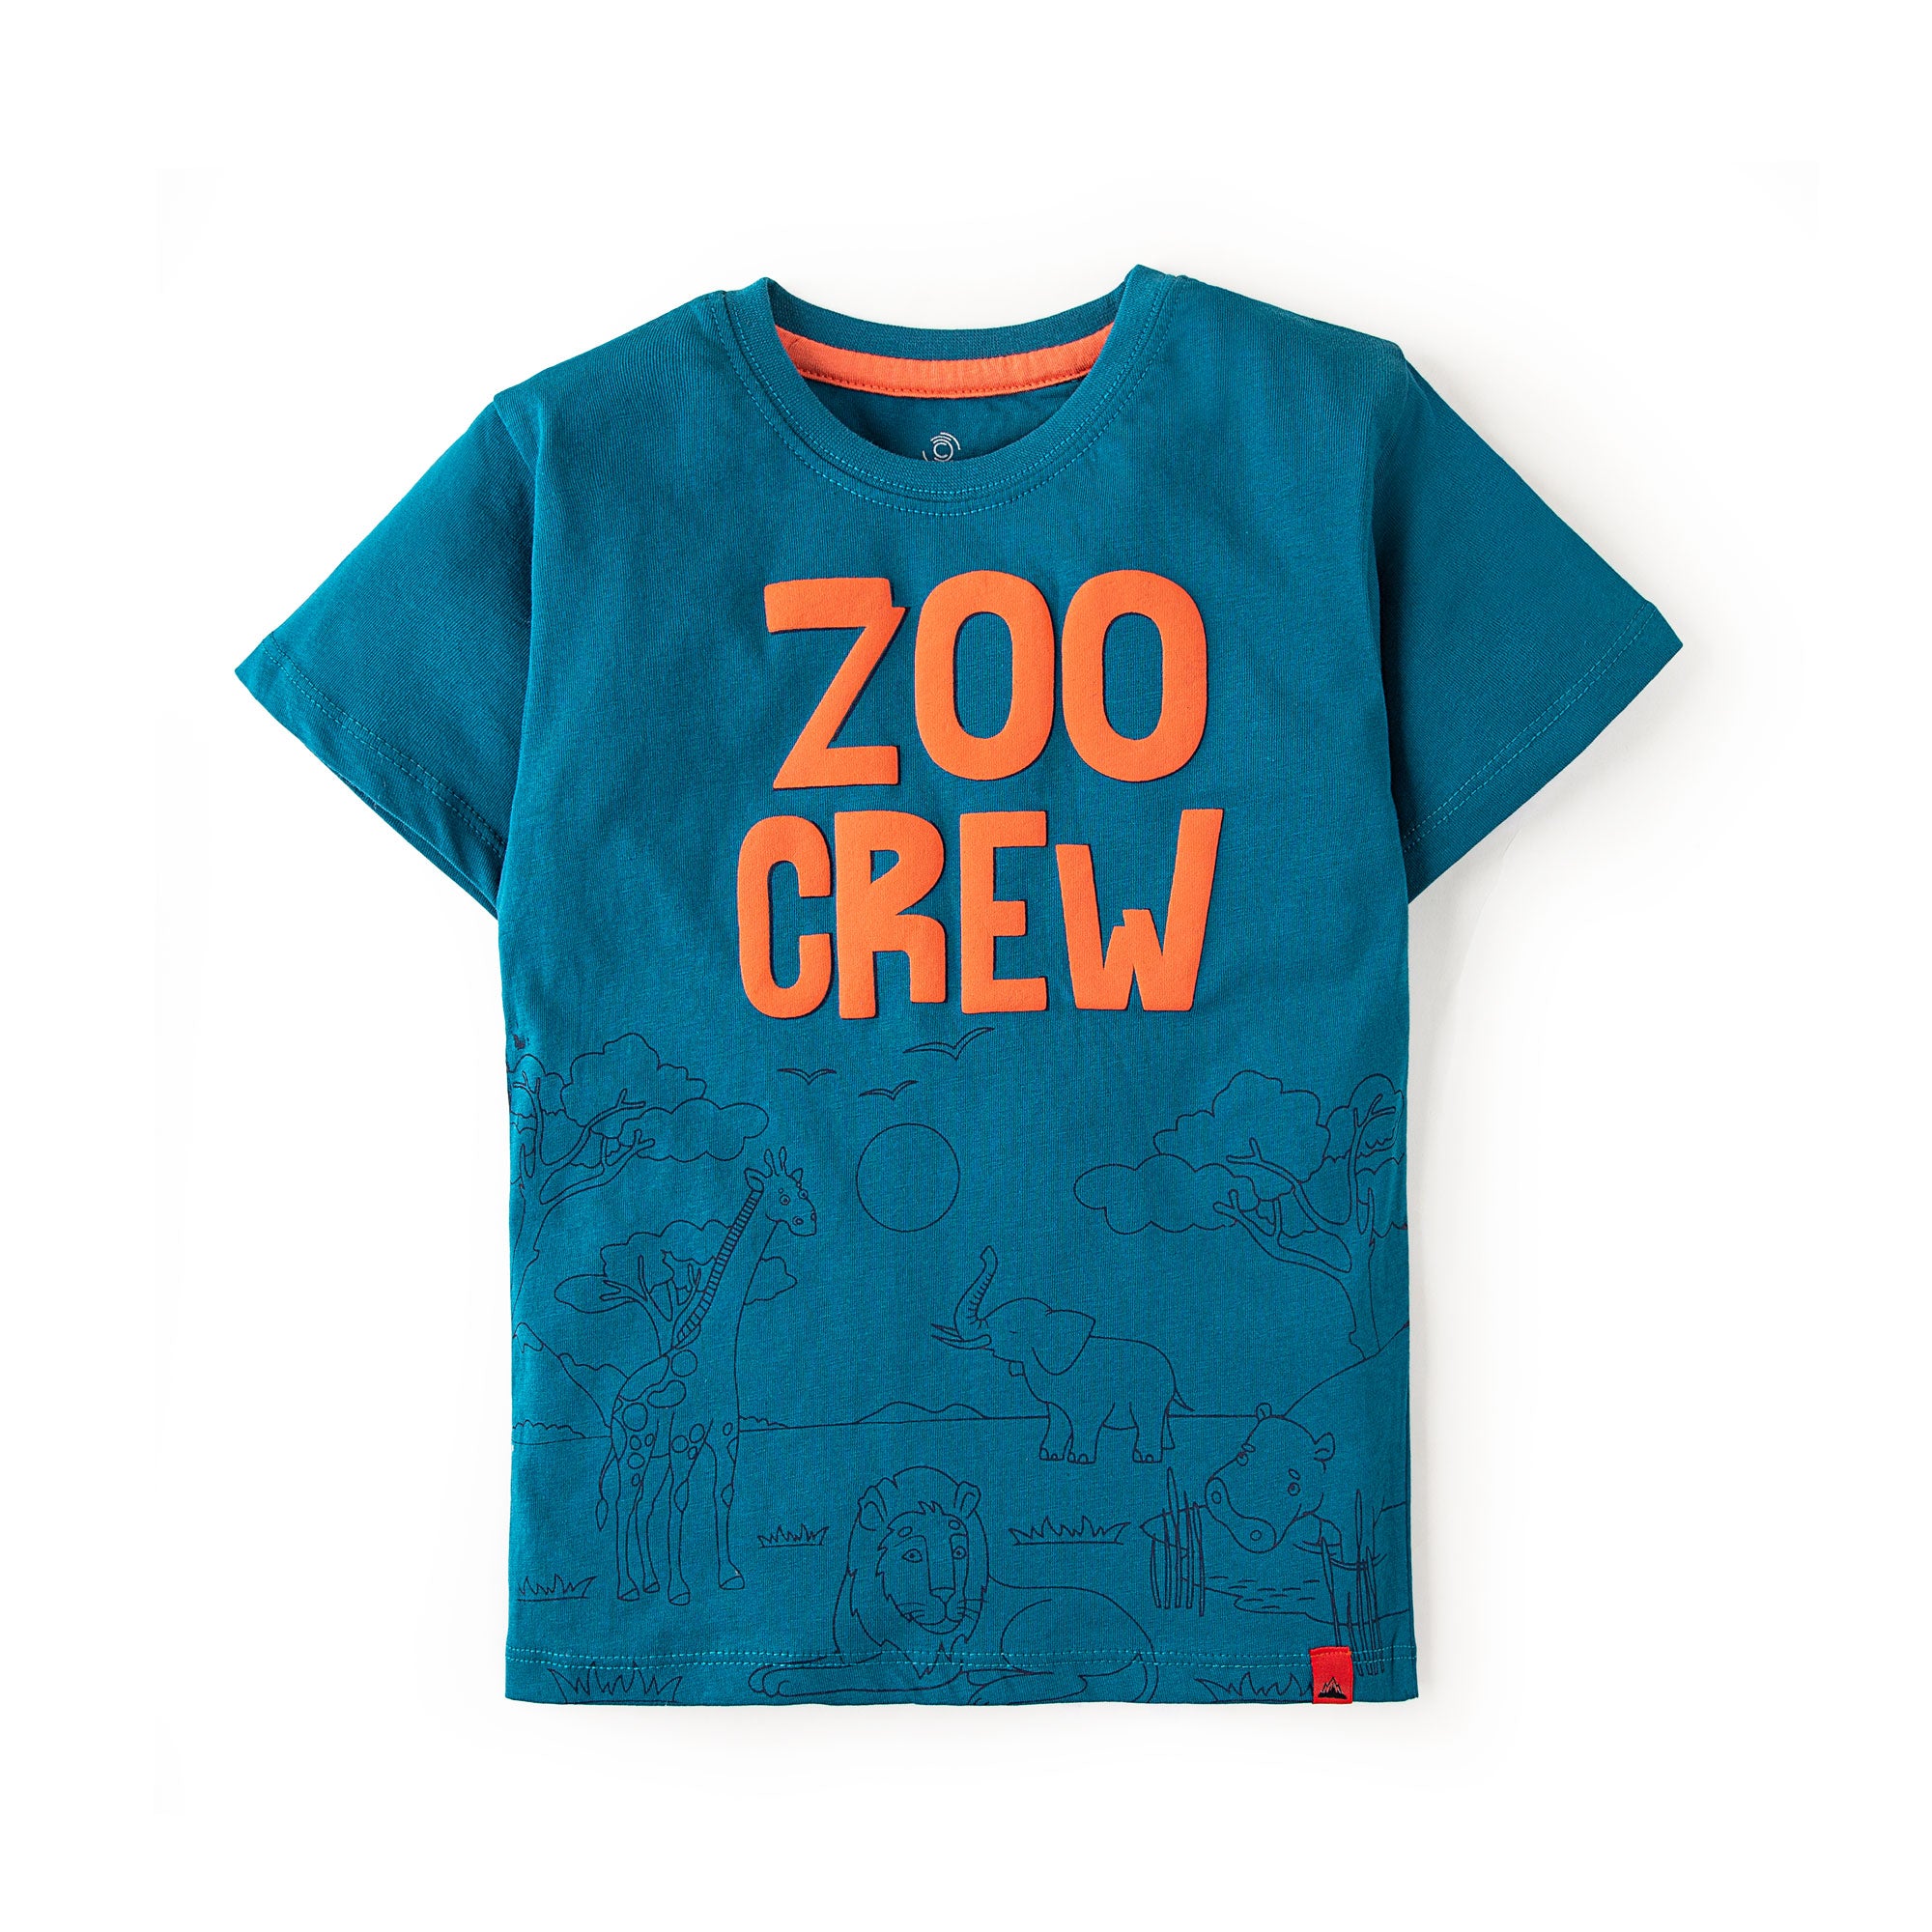 Nifty zoological t-shirt